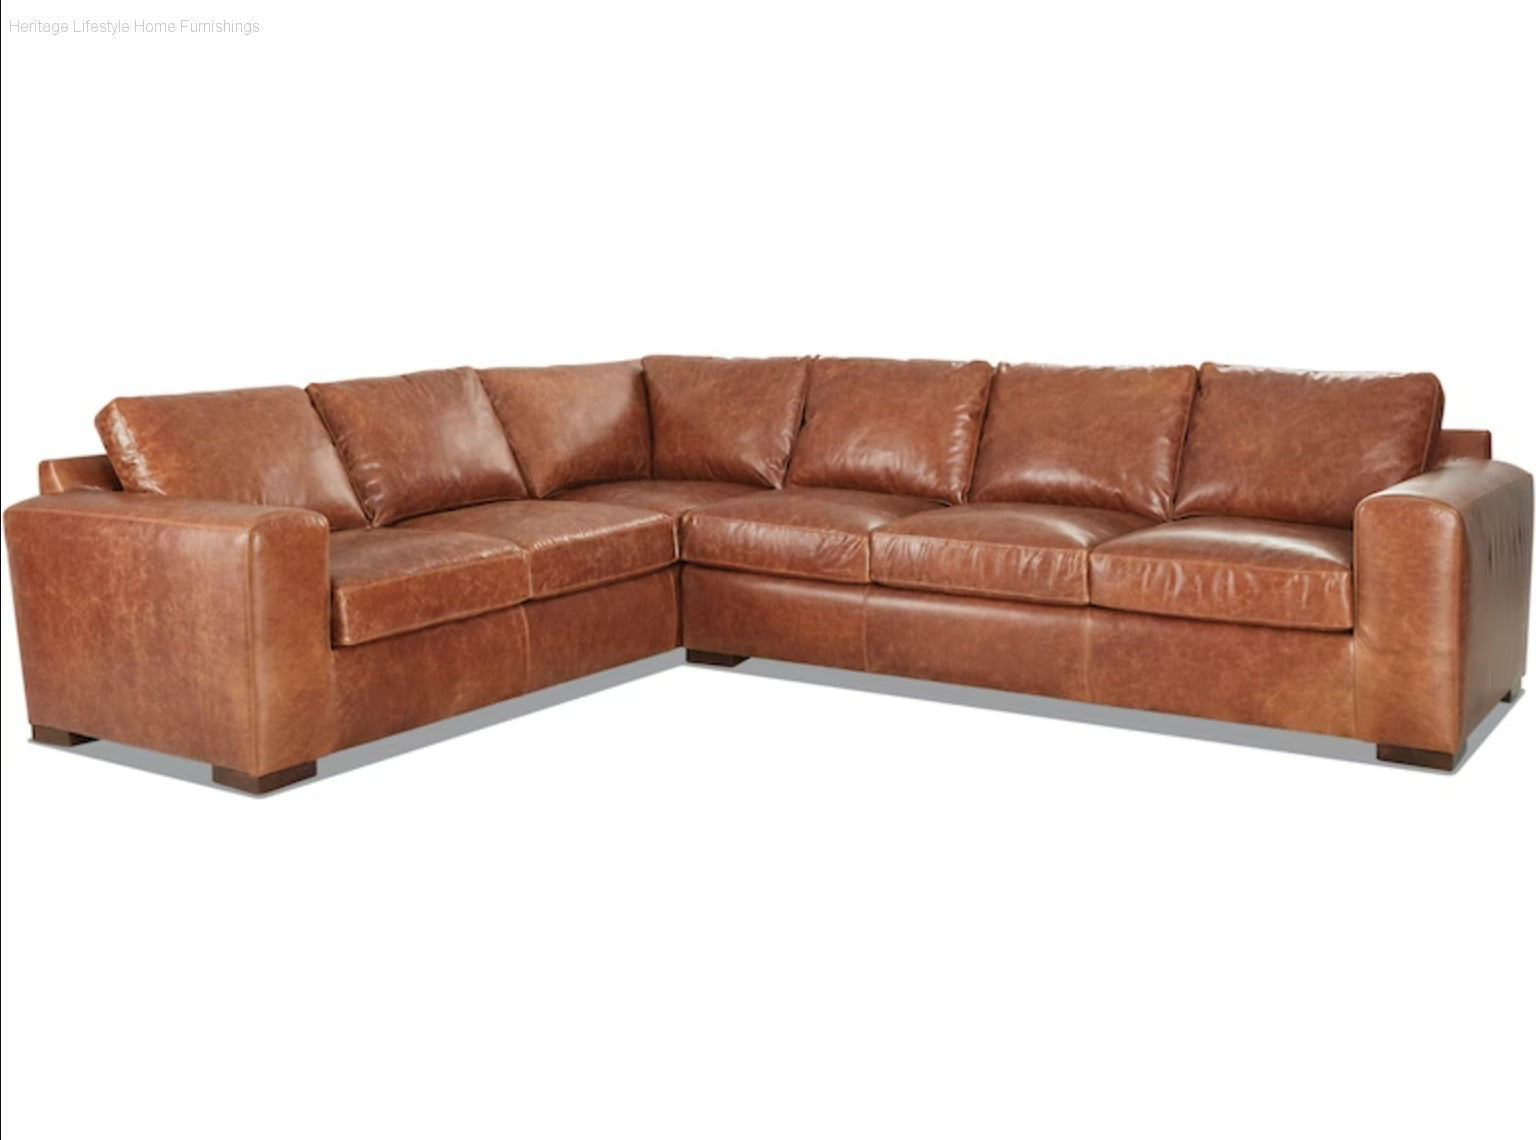 Sectional - Matteo Leather Sectional